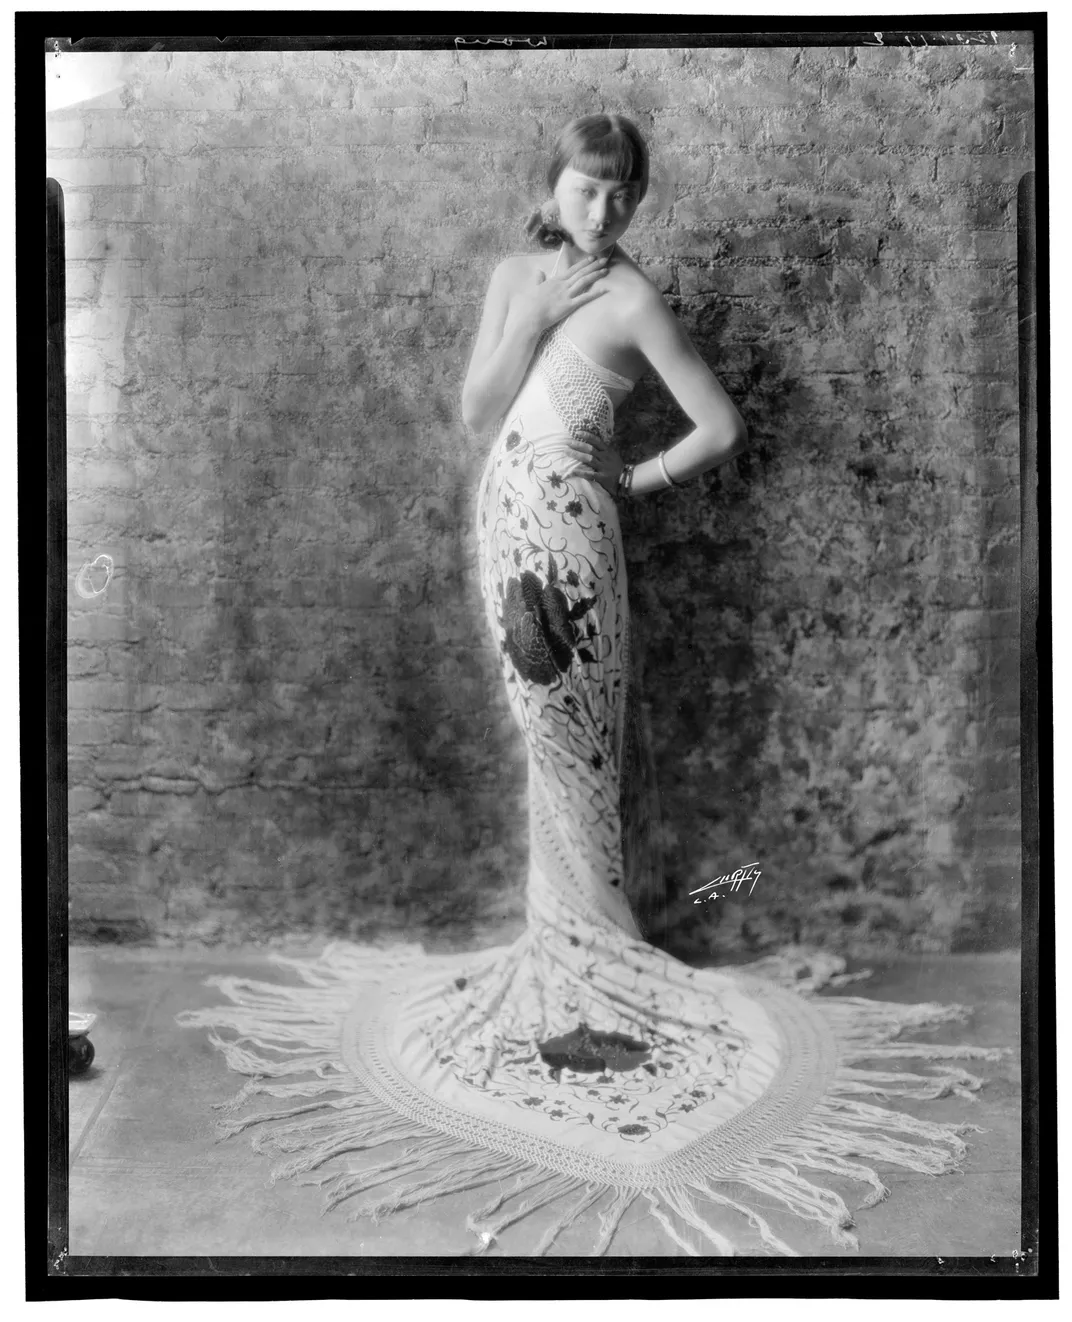 Black-and-white portrait of Anna May Wong standing against a wall, wearing an elaborate dress decorated in a flower moti